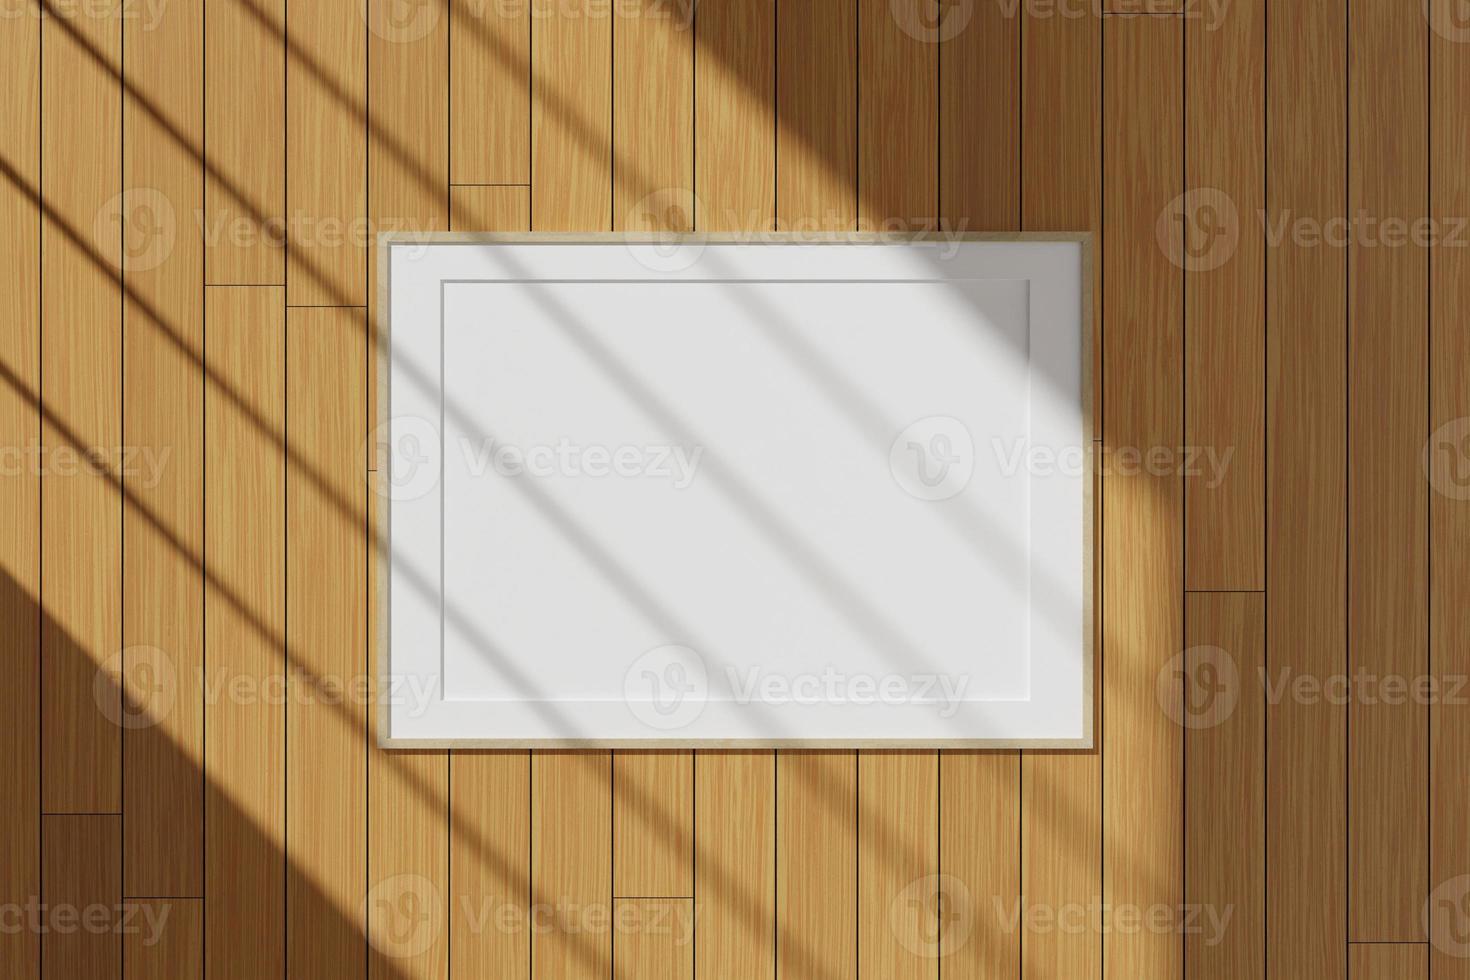 Horizontal wooden poster or photo frame mockup hanging on the wall with window shadow. 3D rendering.